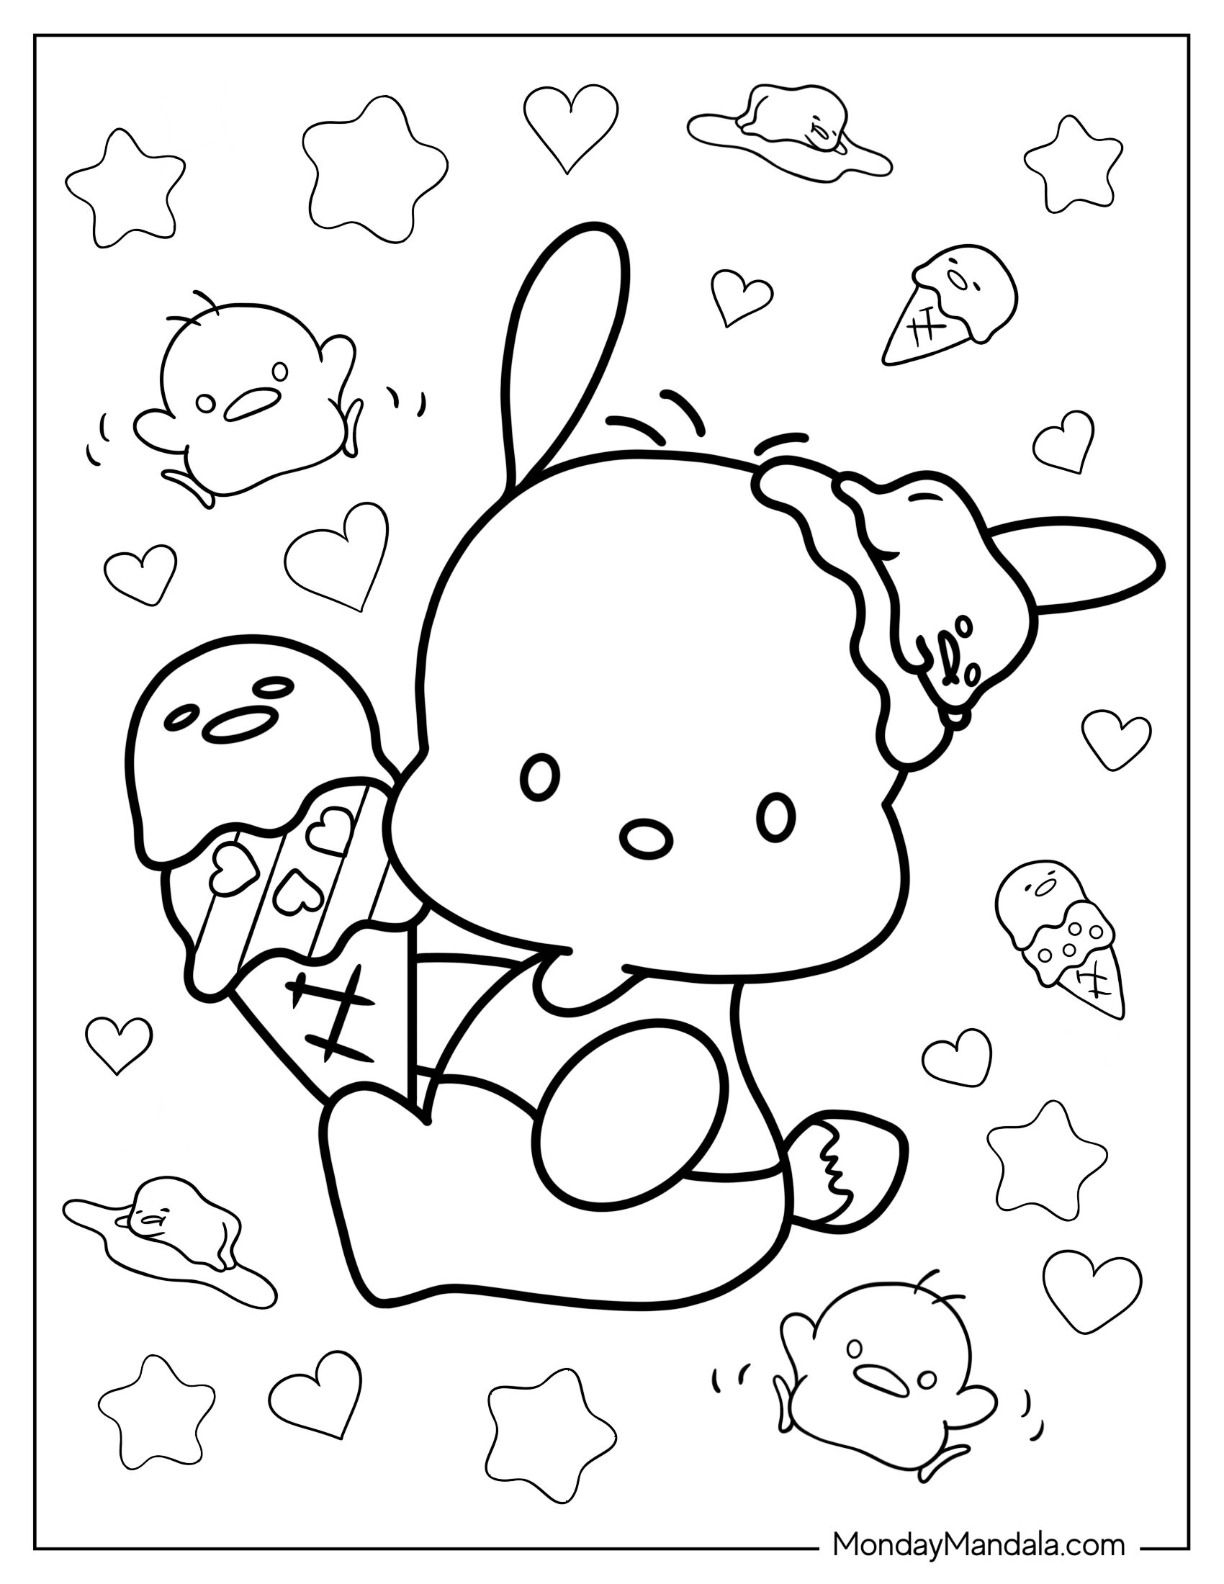 Sanrio coloring pages free pdf printables hello kitty colouring pages hello kitty coloring cute coloring pages